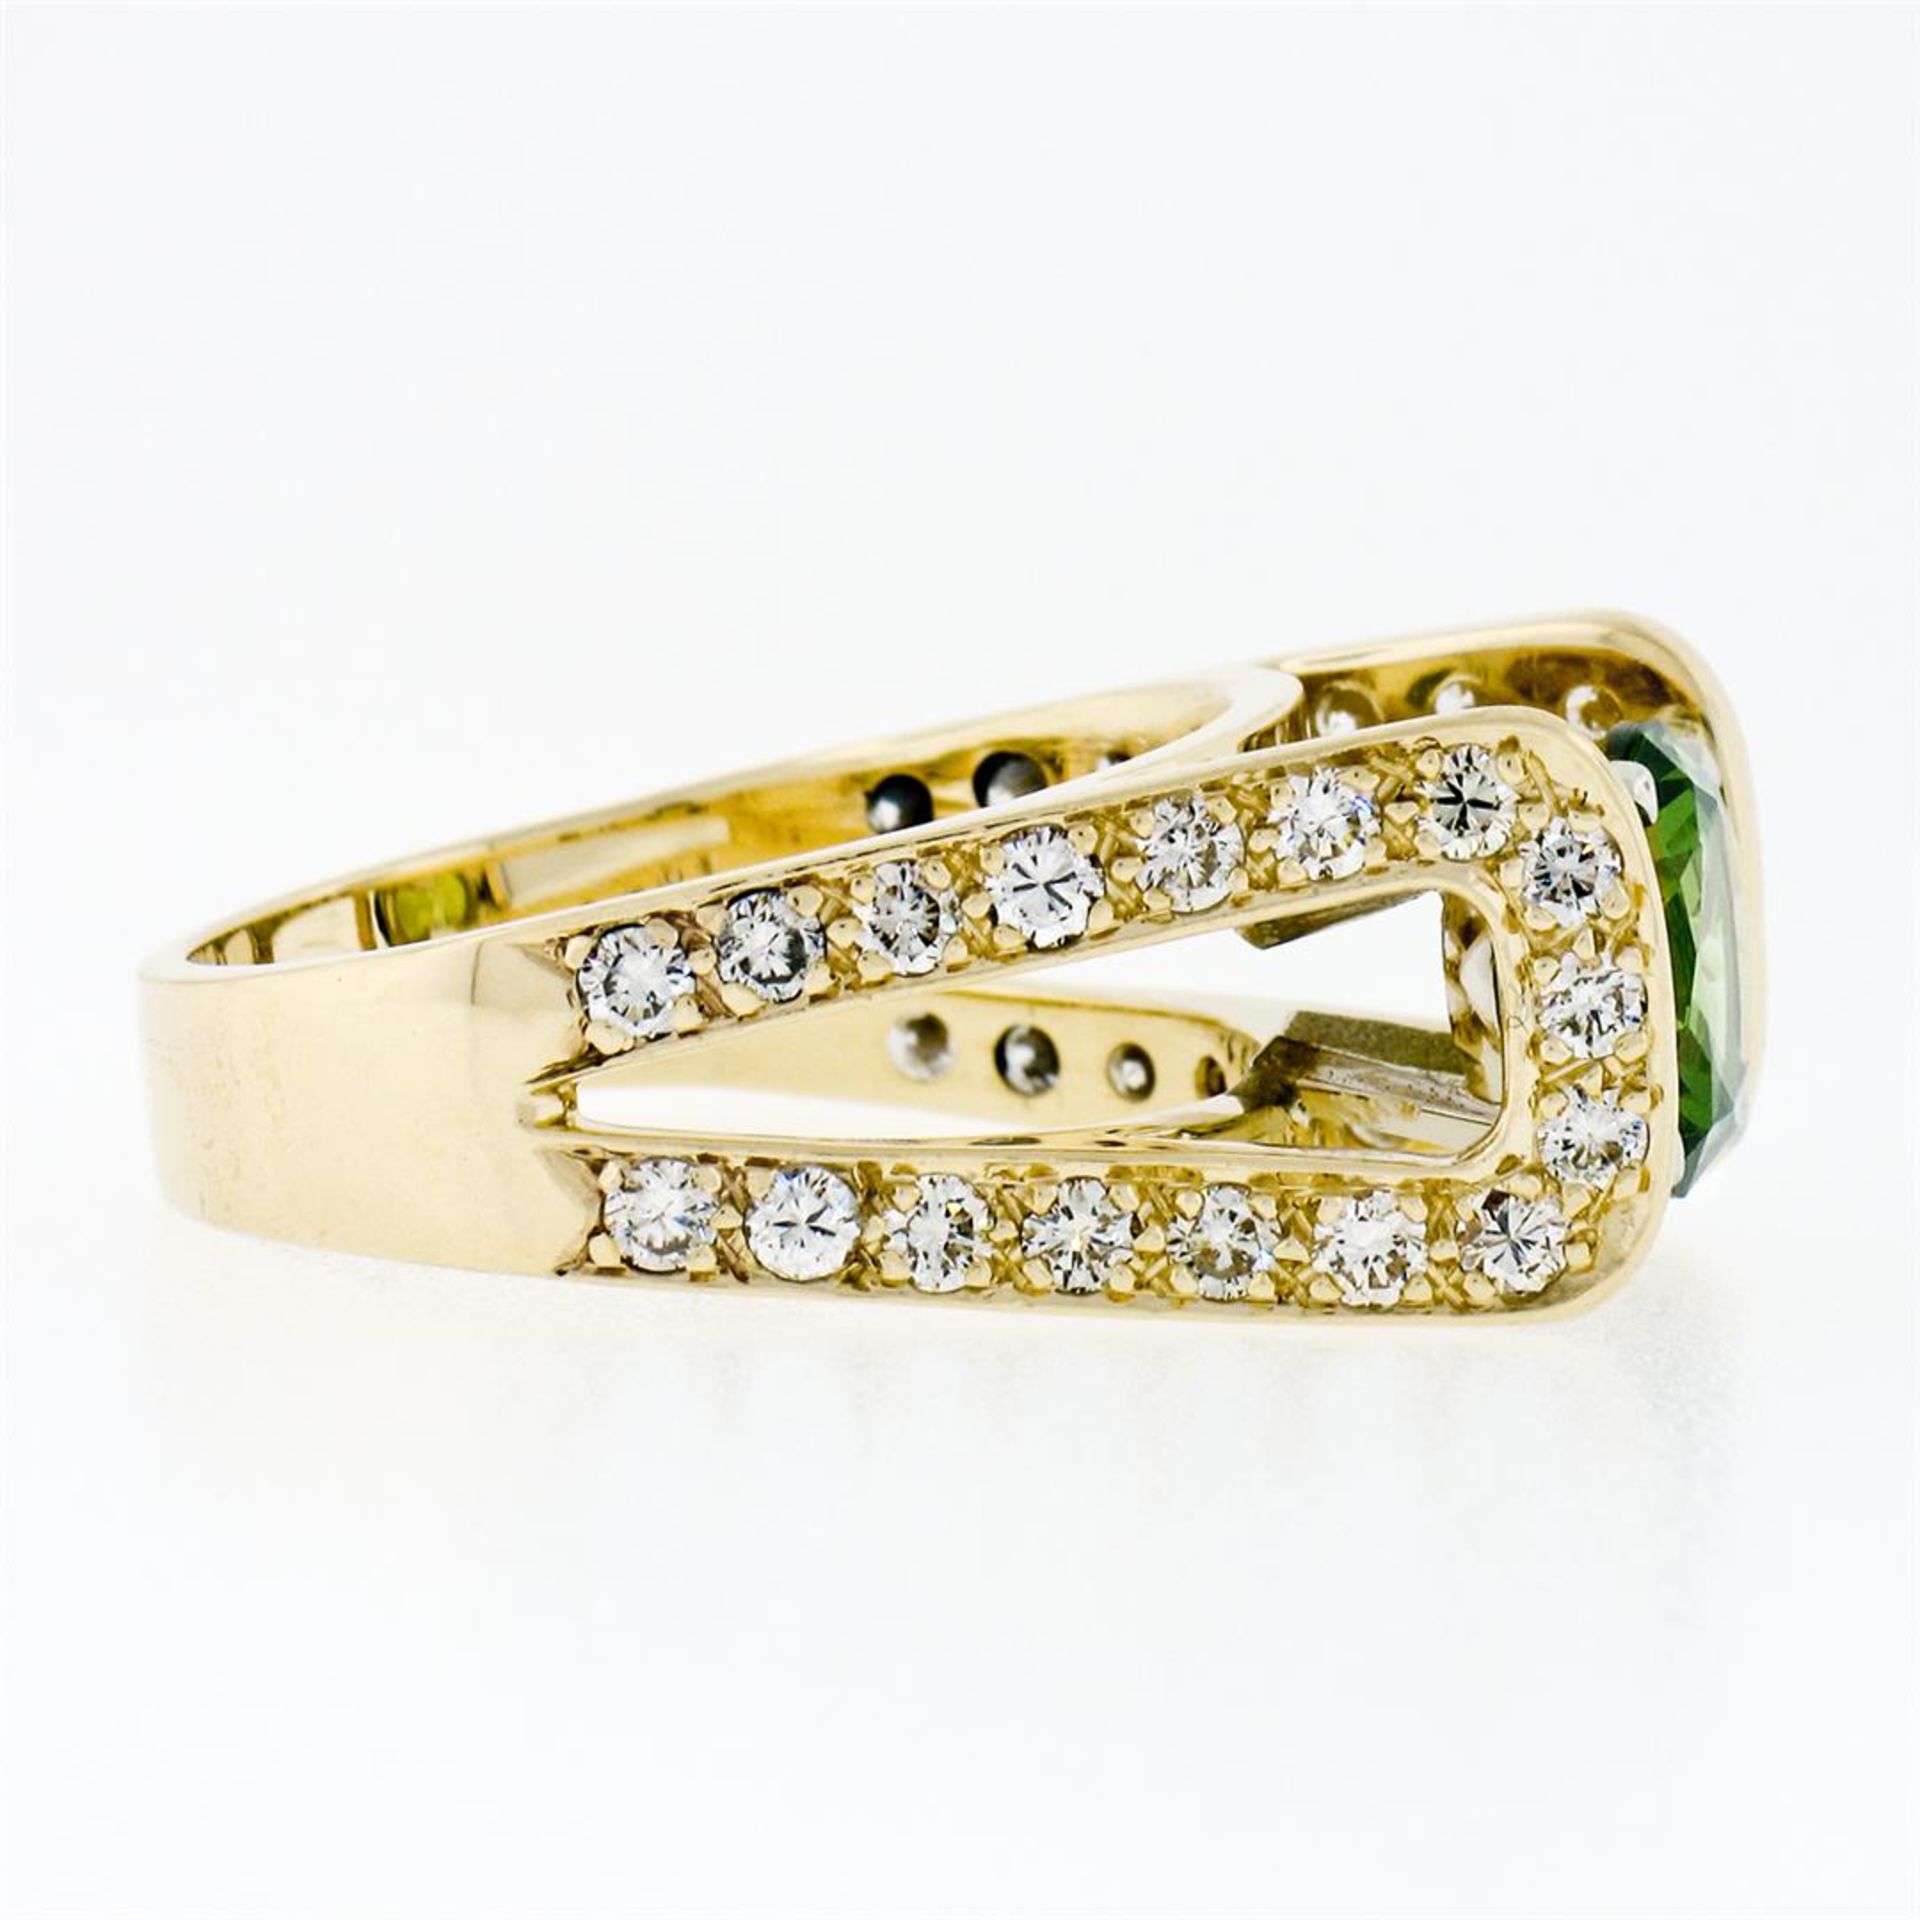 14k Yellow Gold 3.0ctw Round Peridot Solitaire & Ideal Cut Diamond Cocktail Ring - Image 8 of 9